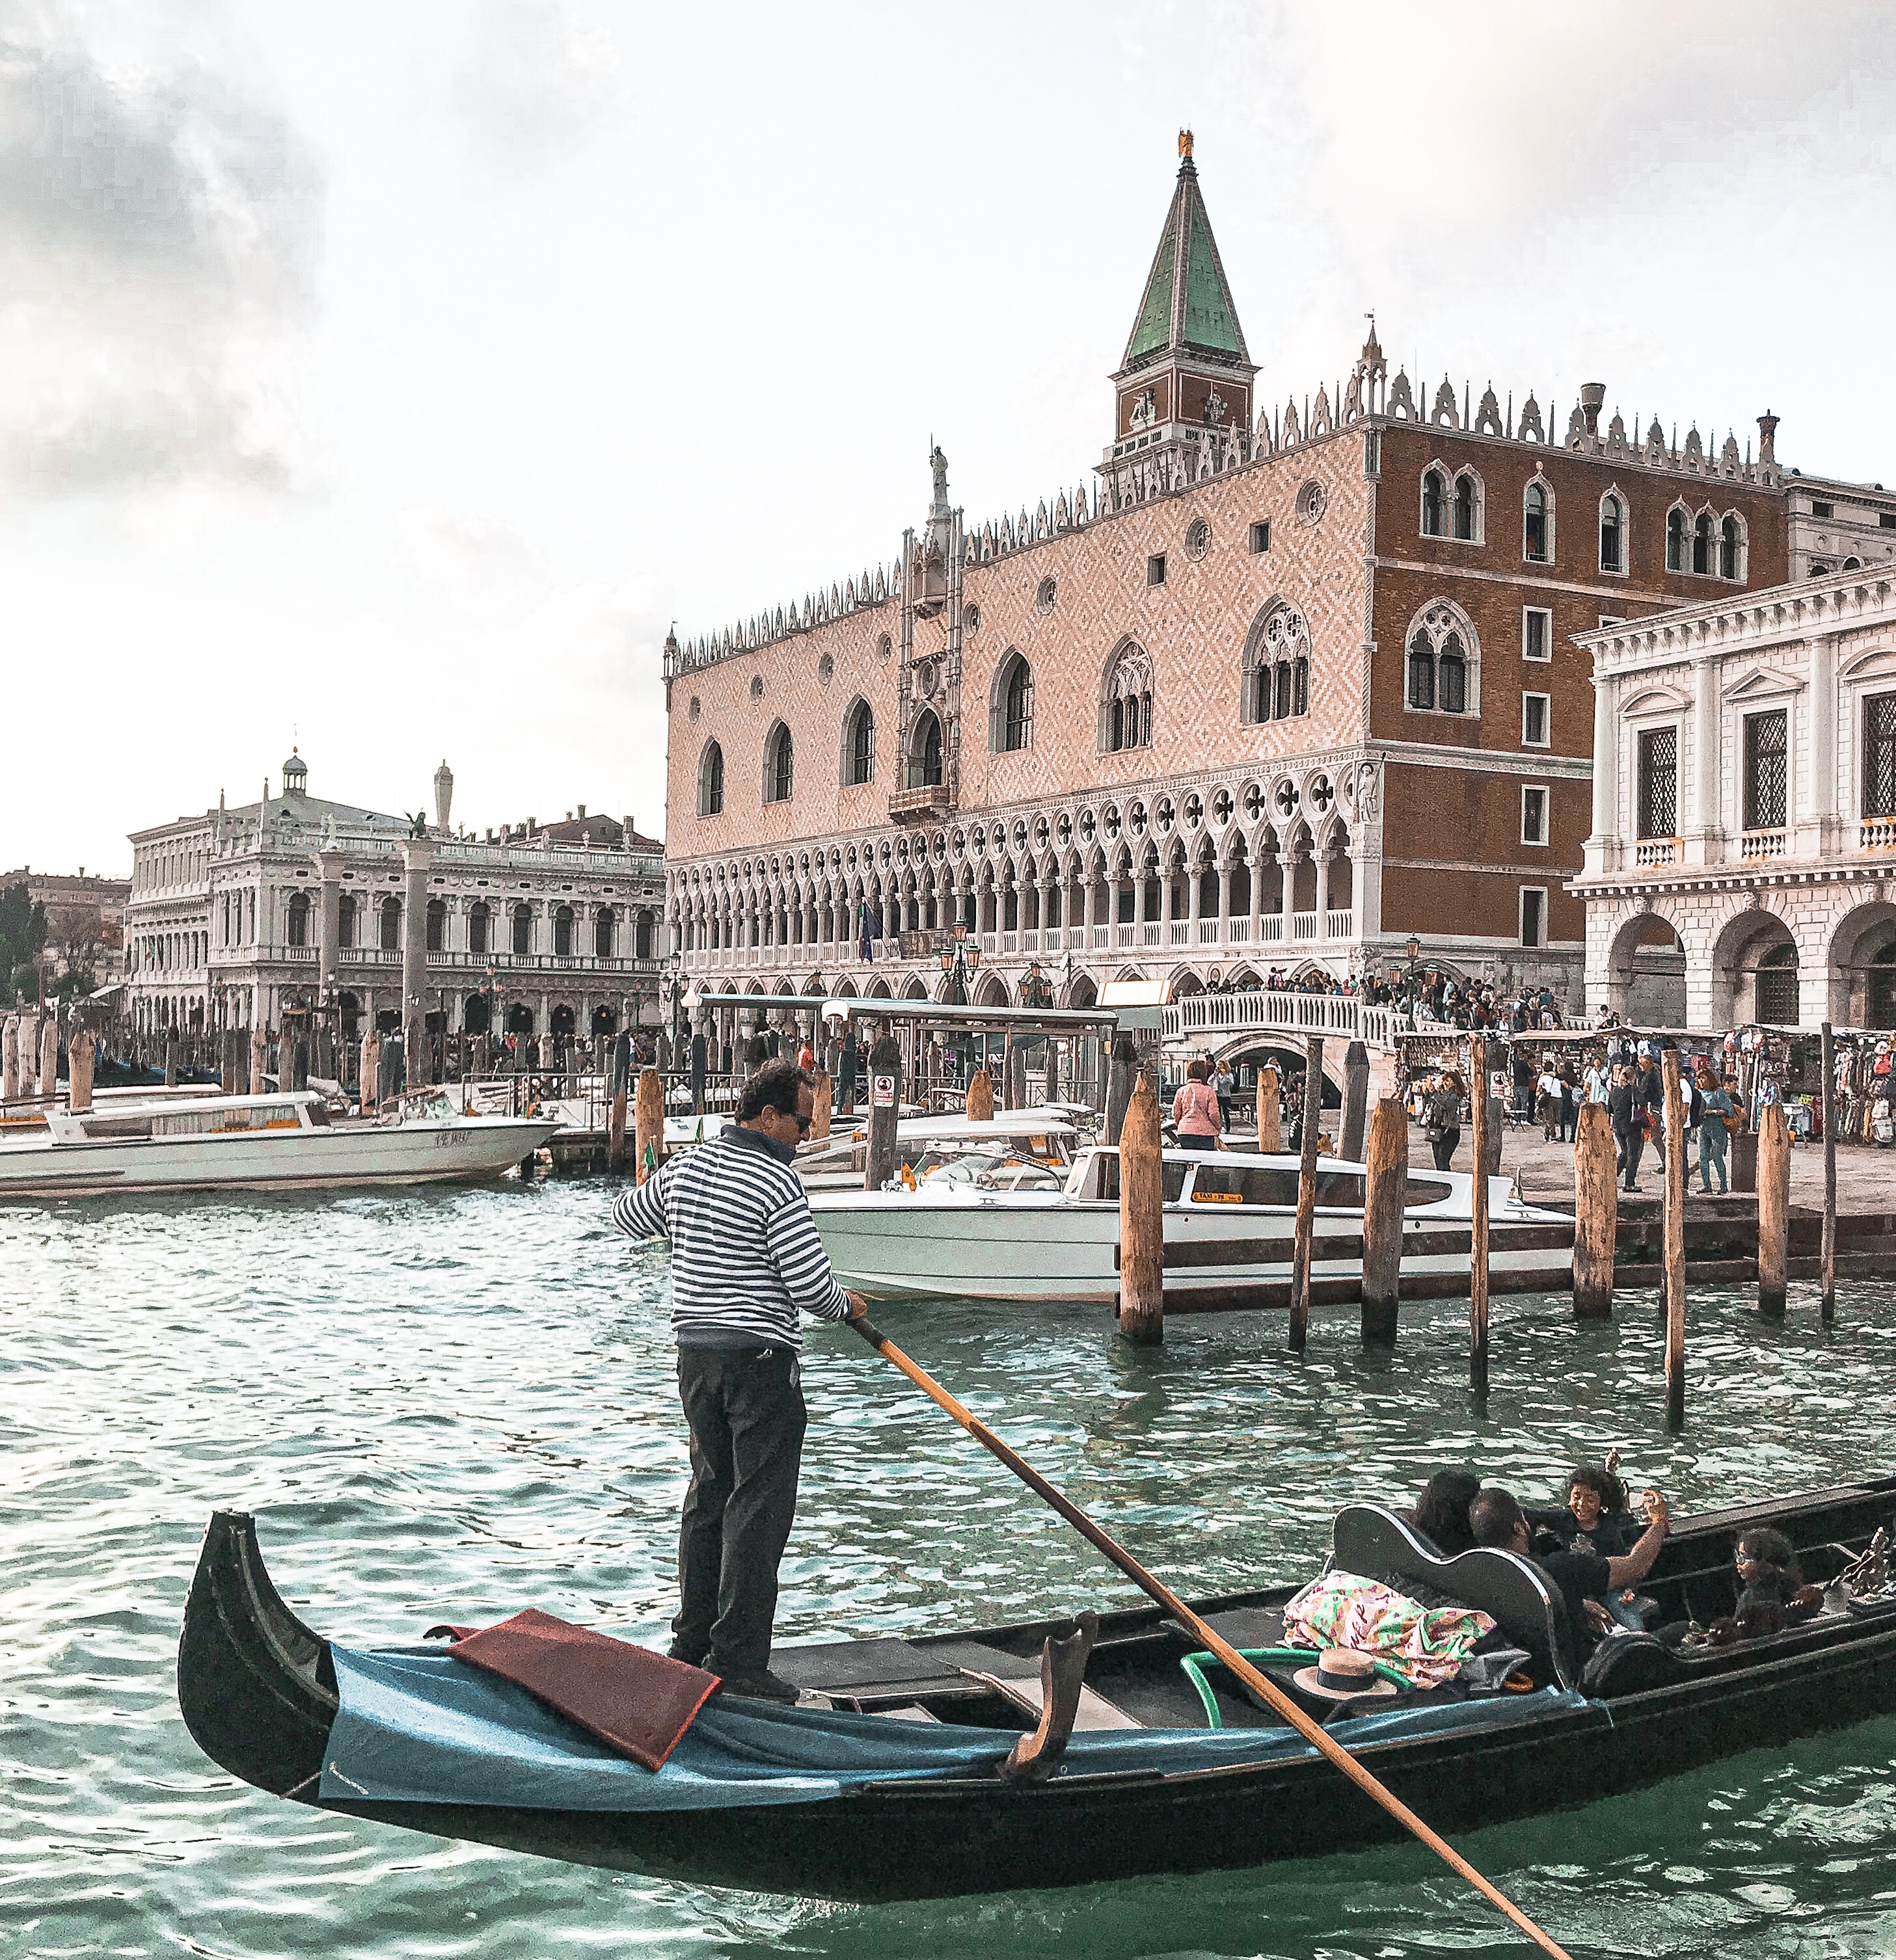 Photo taken on a traghetto, crossing the Grand Canal from Santa Maria Della Salute to San Marco.⁣